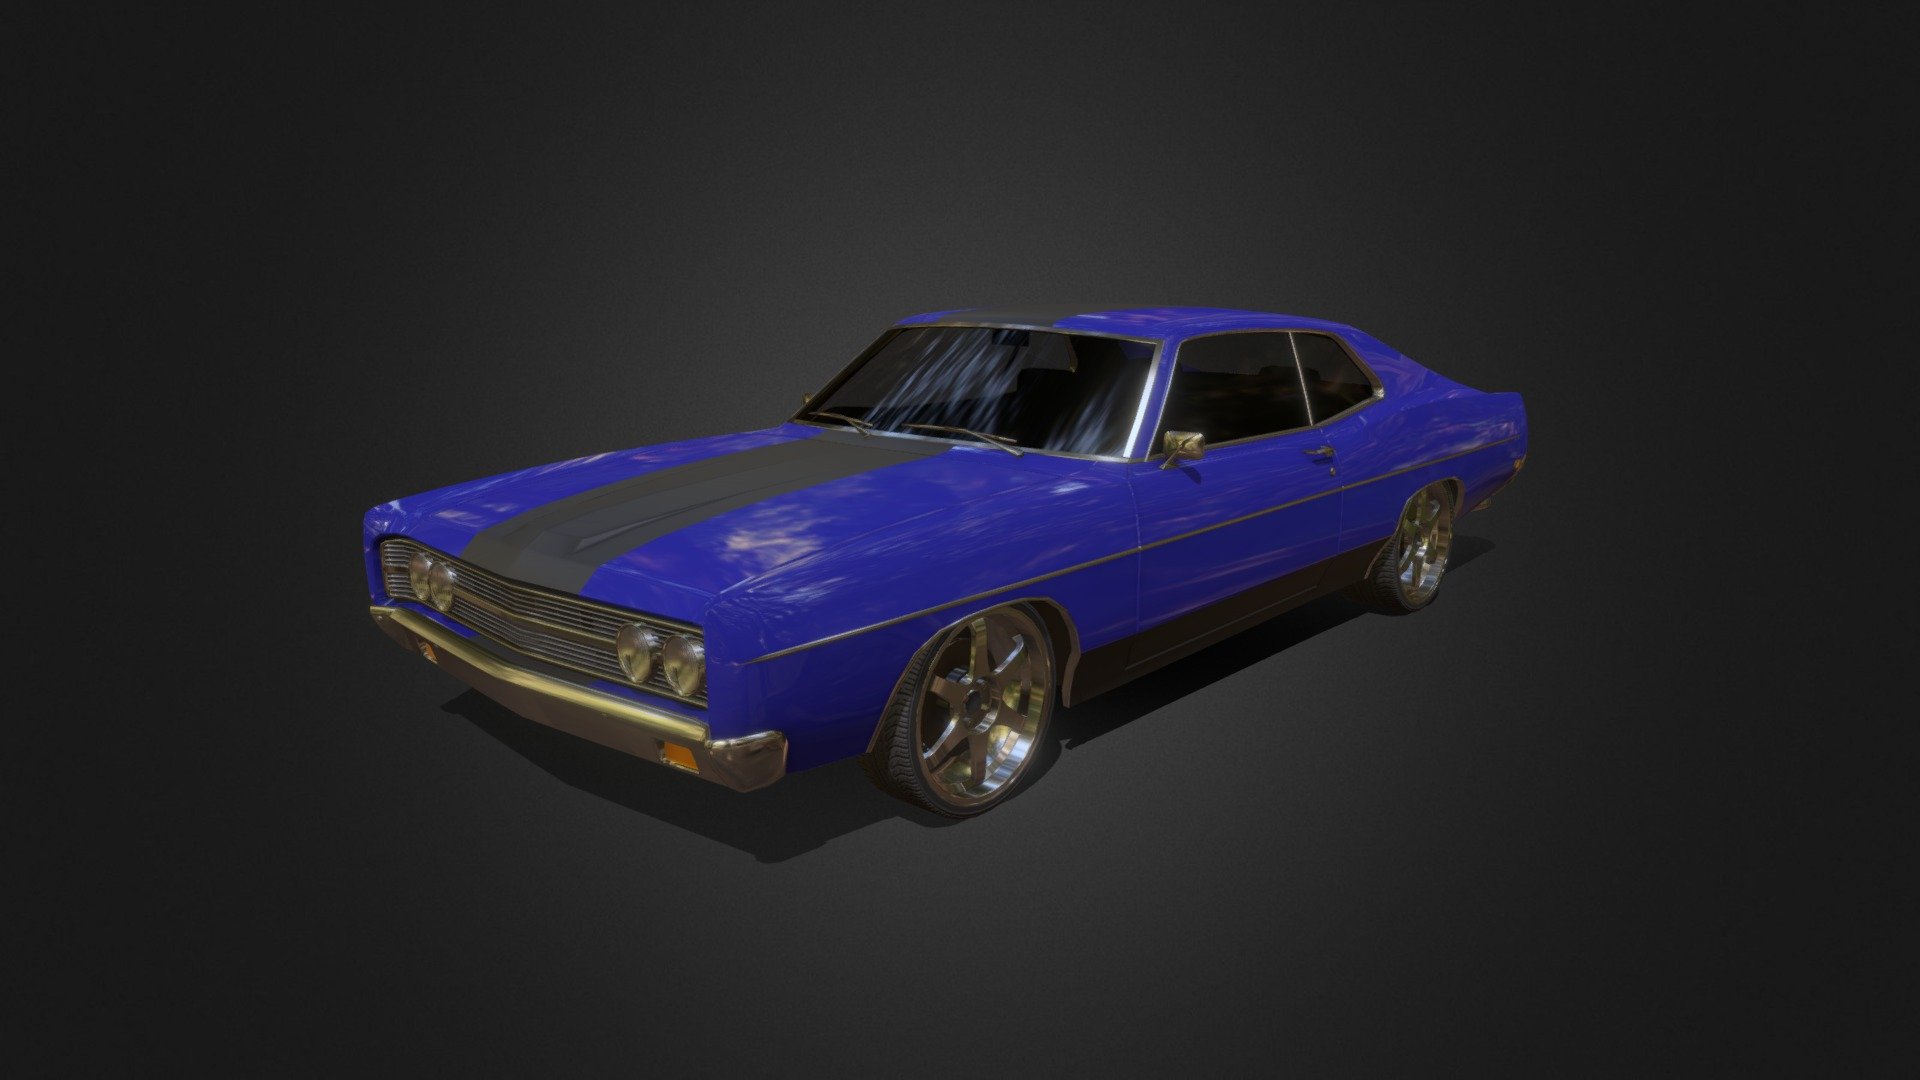 Game-ready vehicle model with Textures, 4 LOD states, and simplified collision meshes.

Vehicle model is based on 1960s car designs with modern wheels 3d model